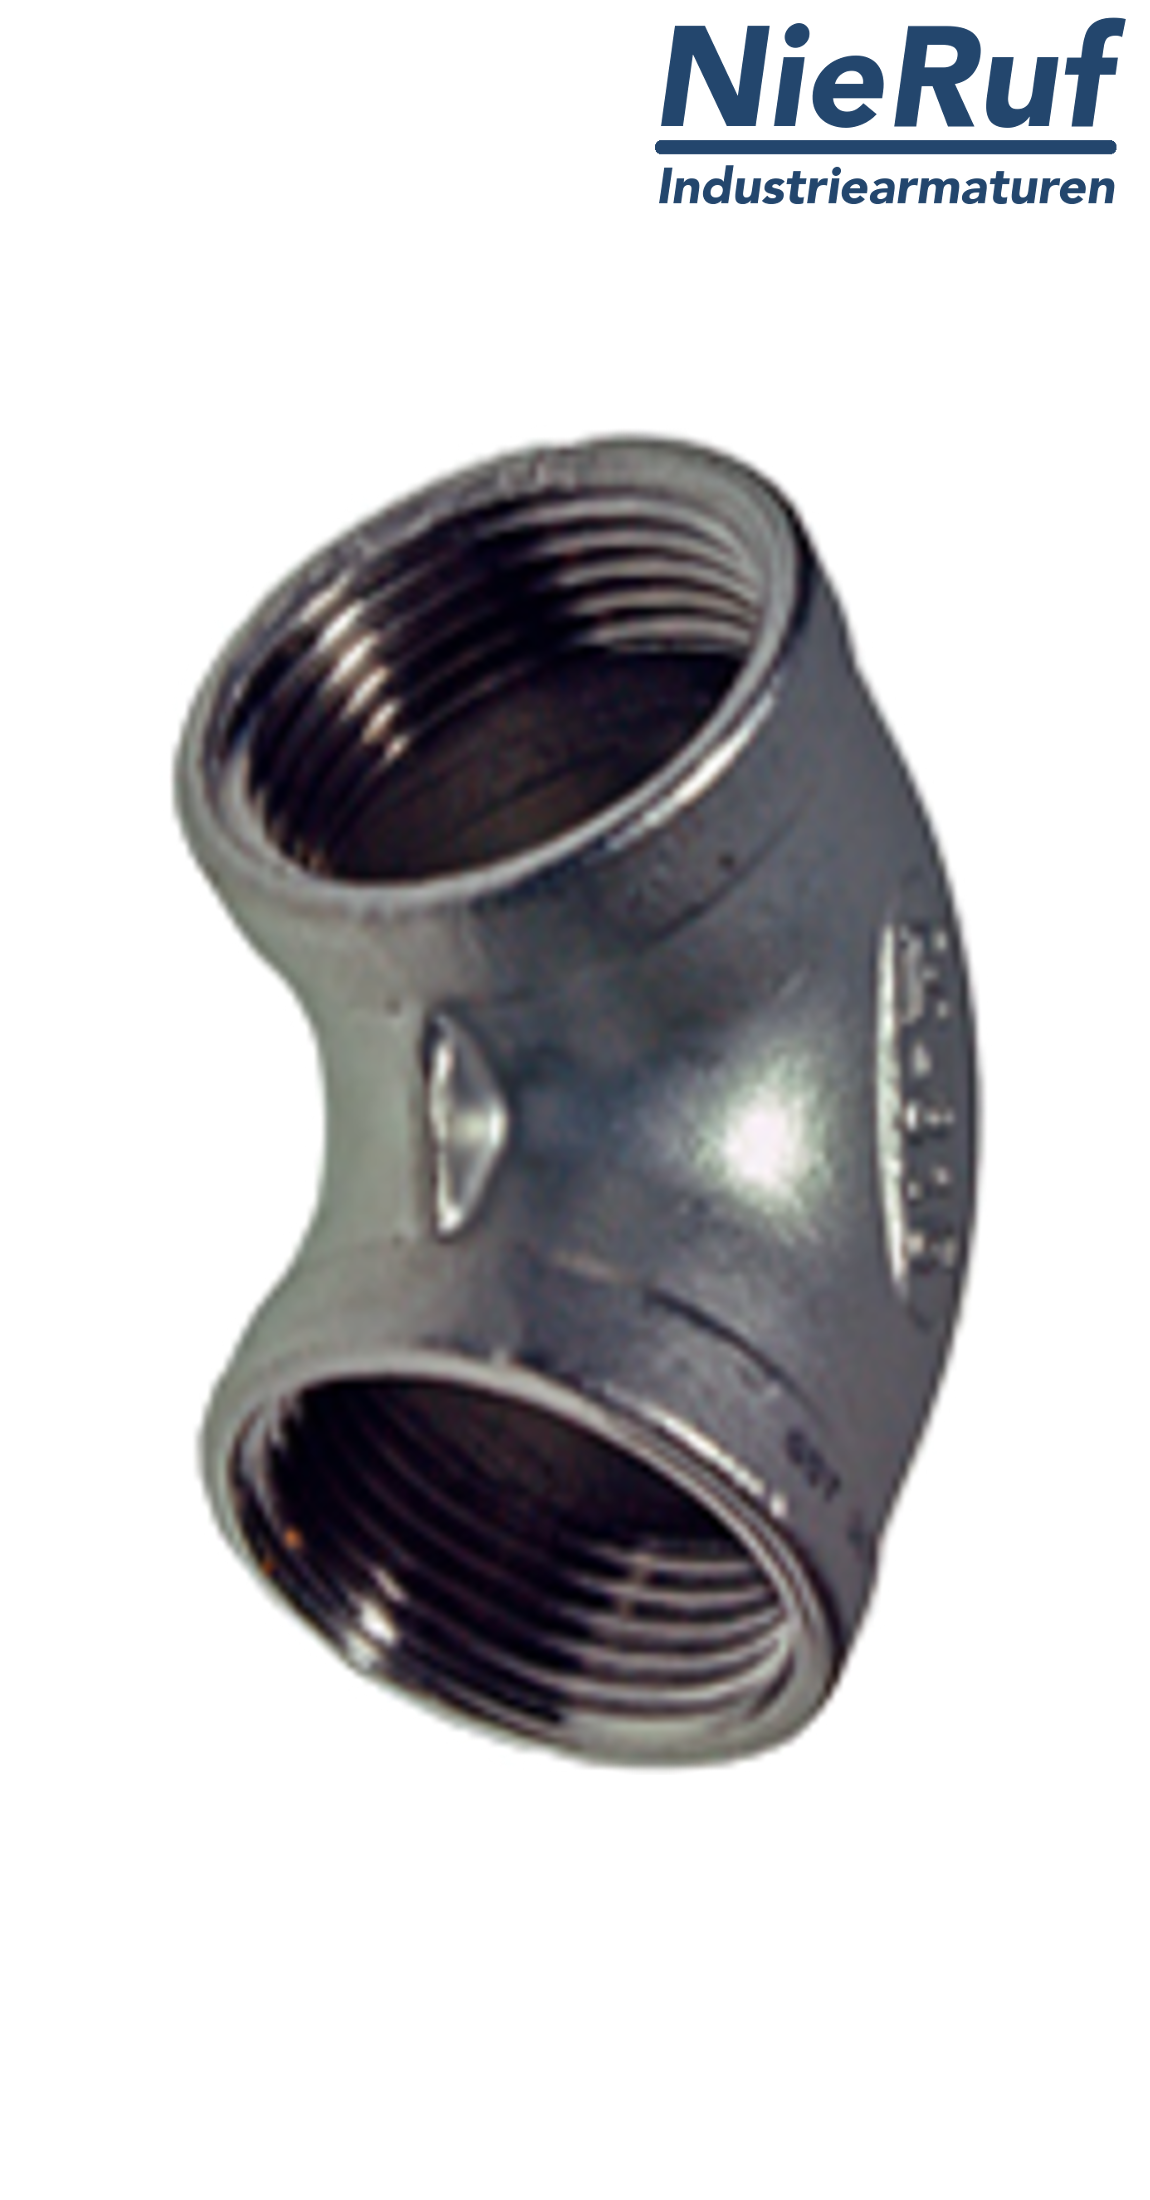 elbow 1 1/4" inch NPT stainless steel 316 90° angle